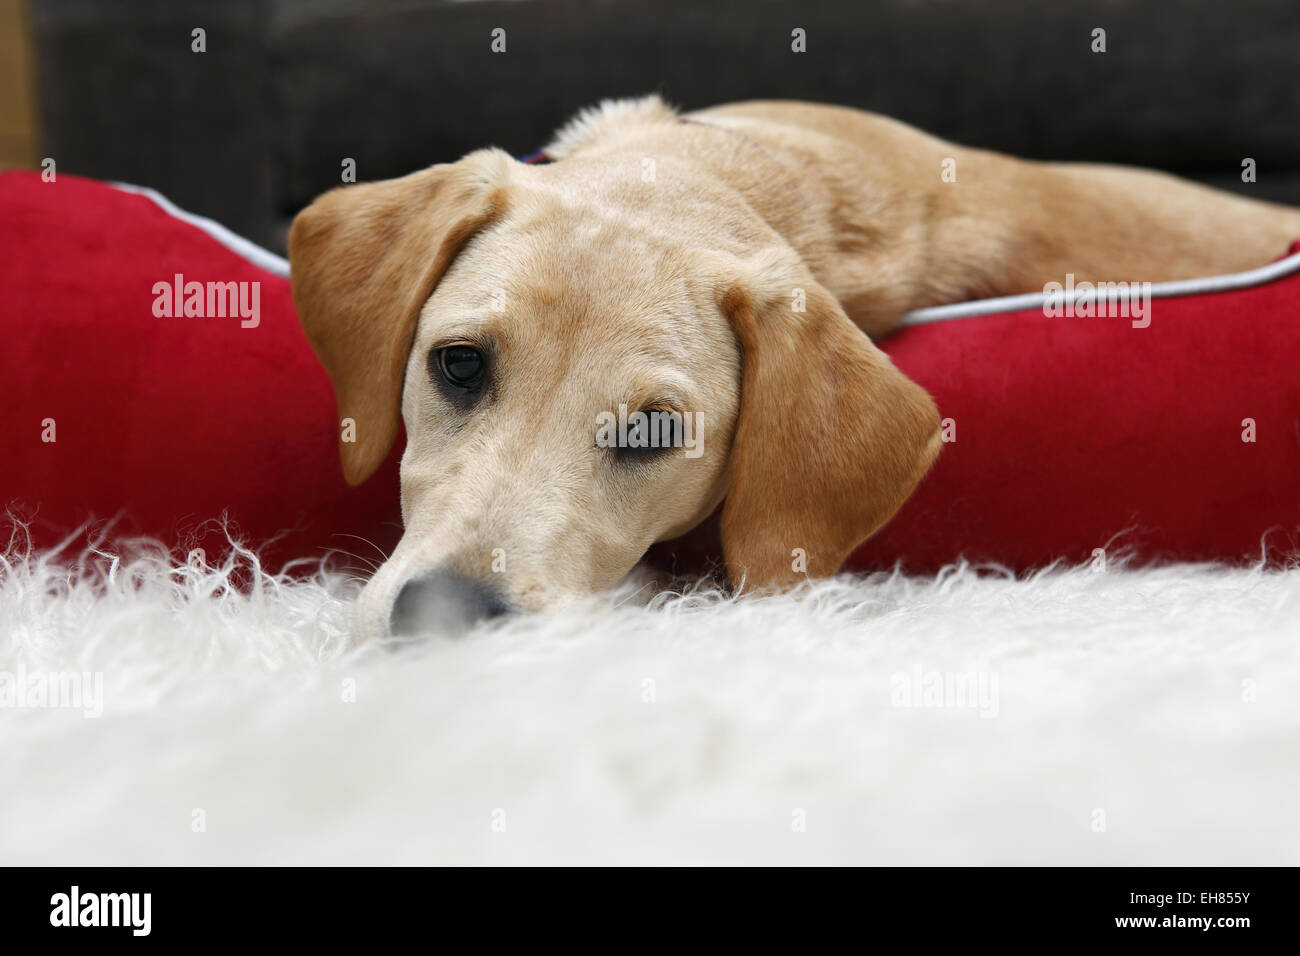 Yellow Labrador Retriever puppy aged 6 months old sleeping in new big bed that will grow into Stock Photo